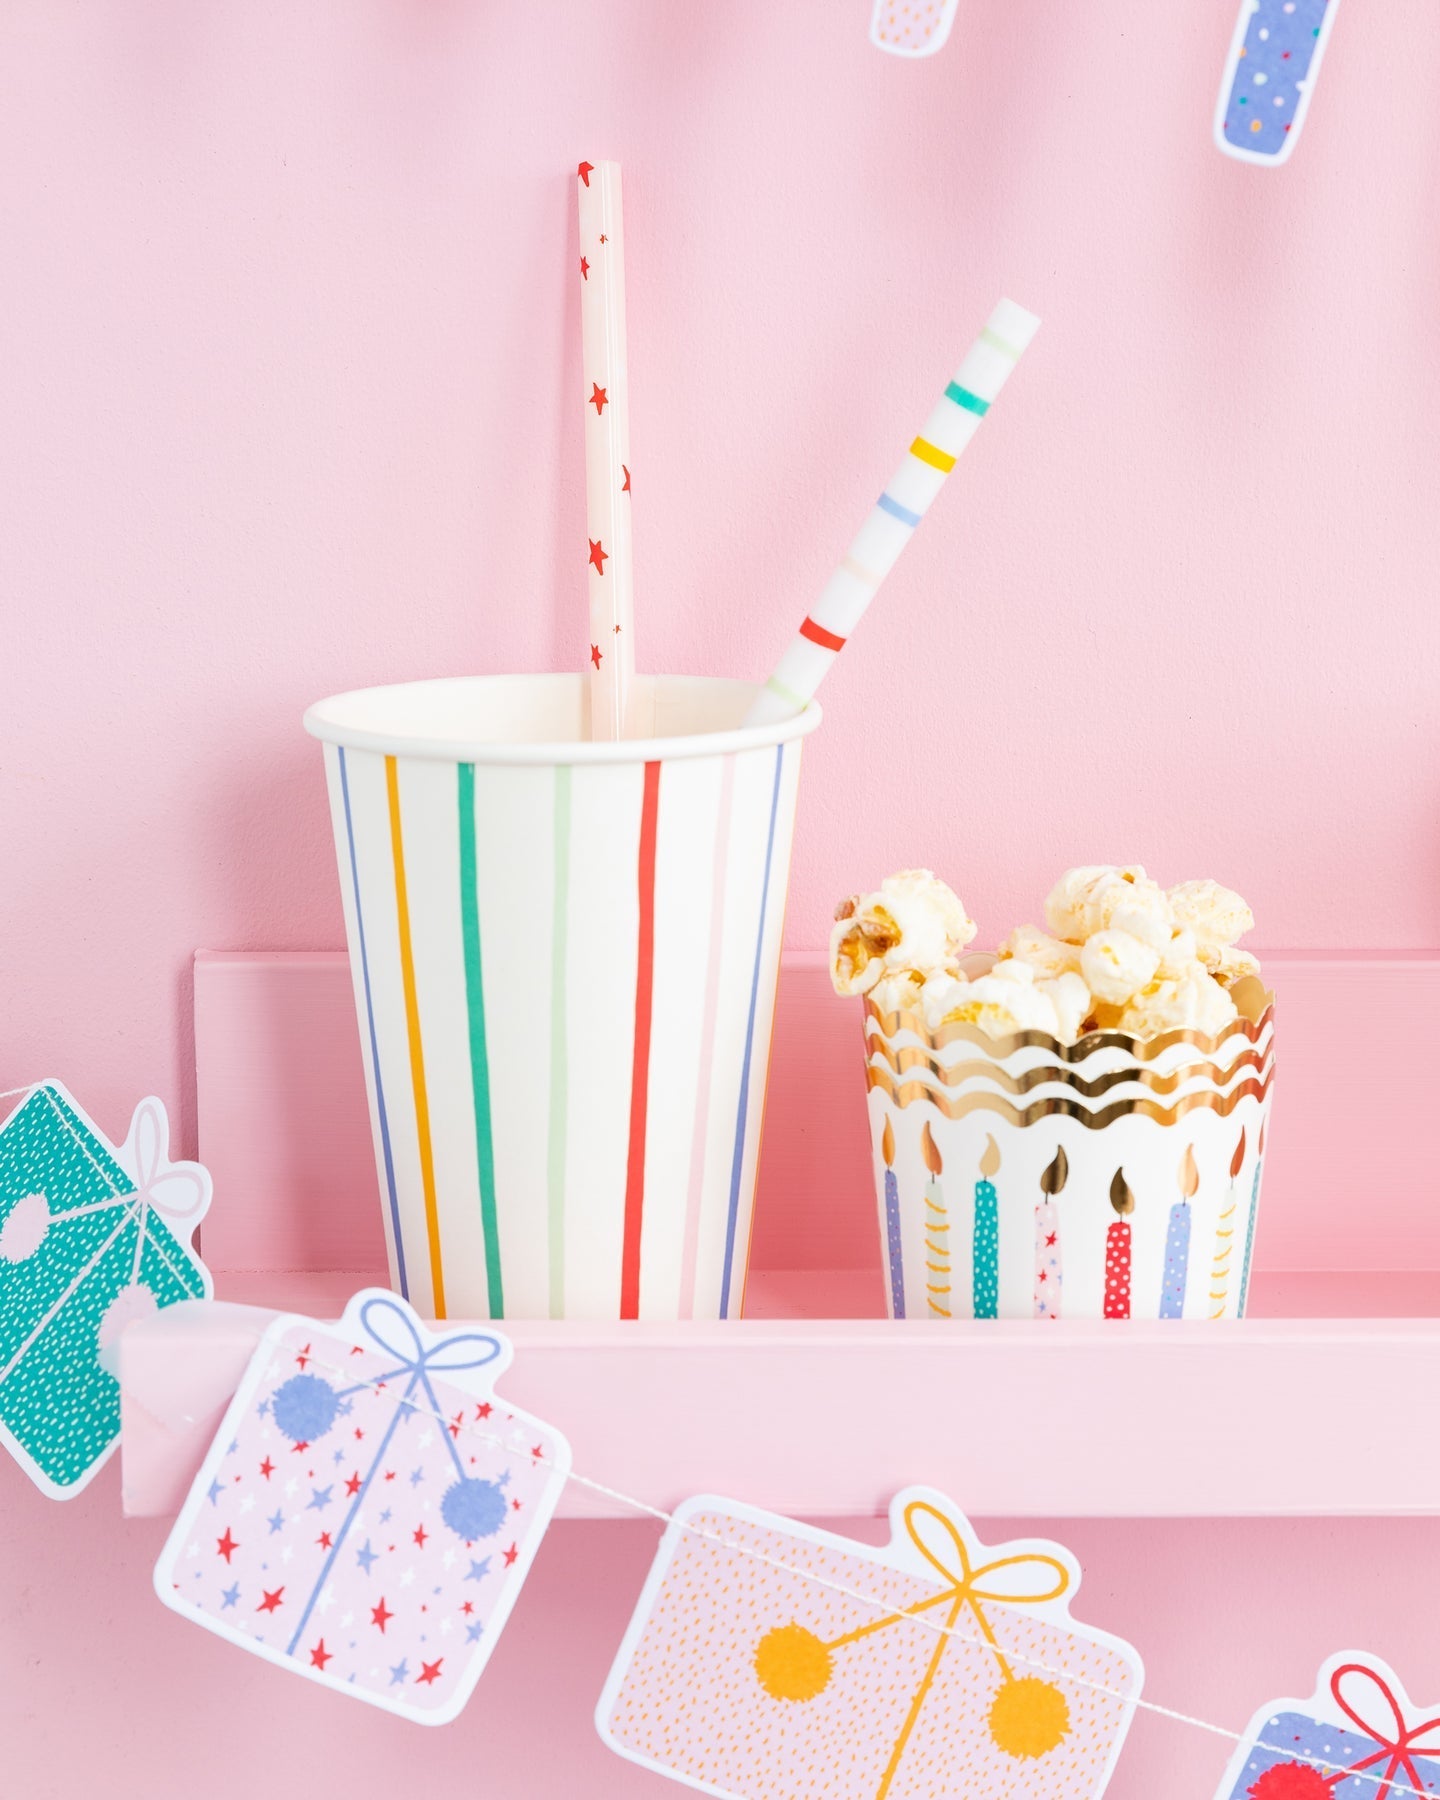 Oui Party Striped Straws - Oh My Darling Party Co-Birthdaybirthday boybirthday cups #Fringe_Backdrop#